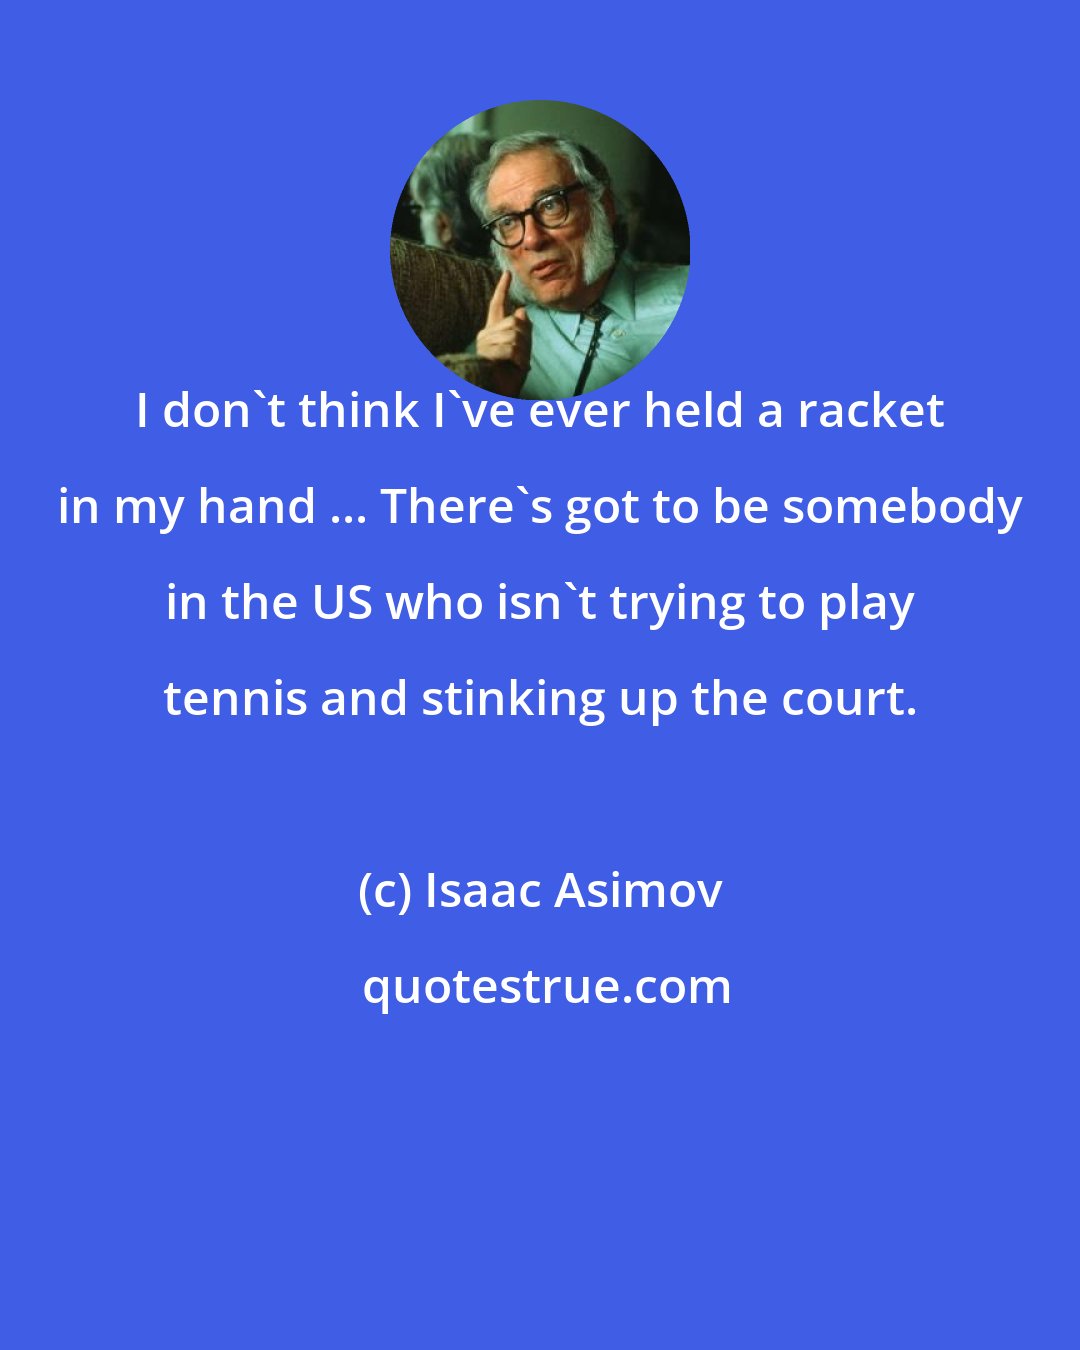 Isaac Asimov: I don't think I've ever held a racket in my hand ... There's got to be somebody in the US who isn't trying to play tennis and stinking up the court.